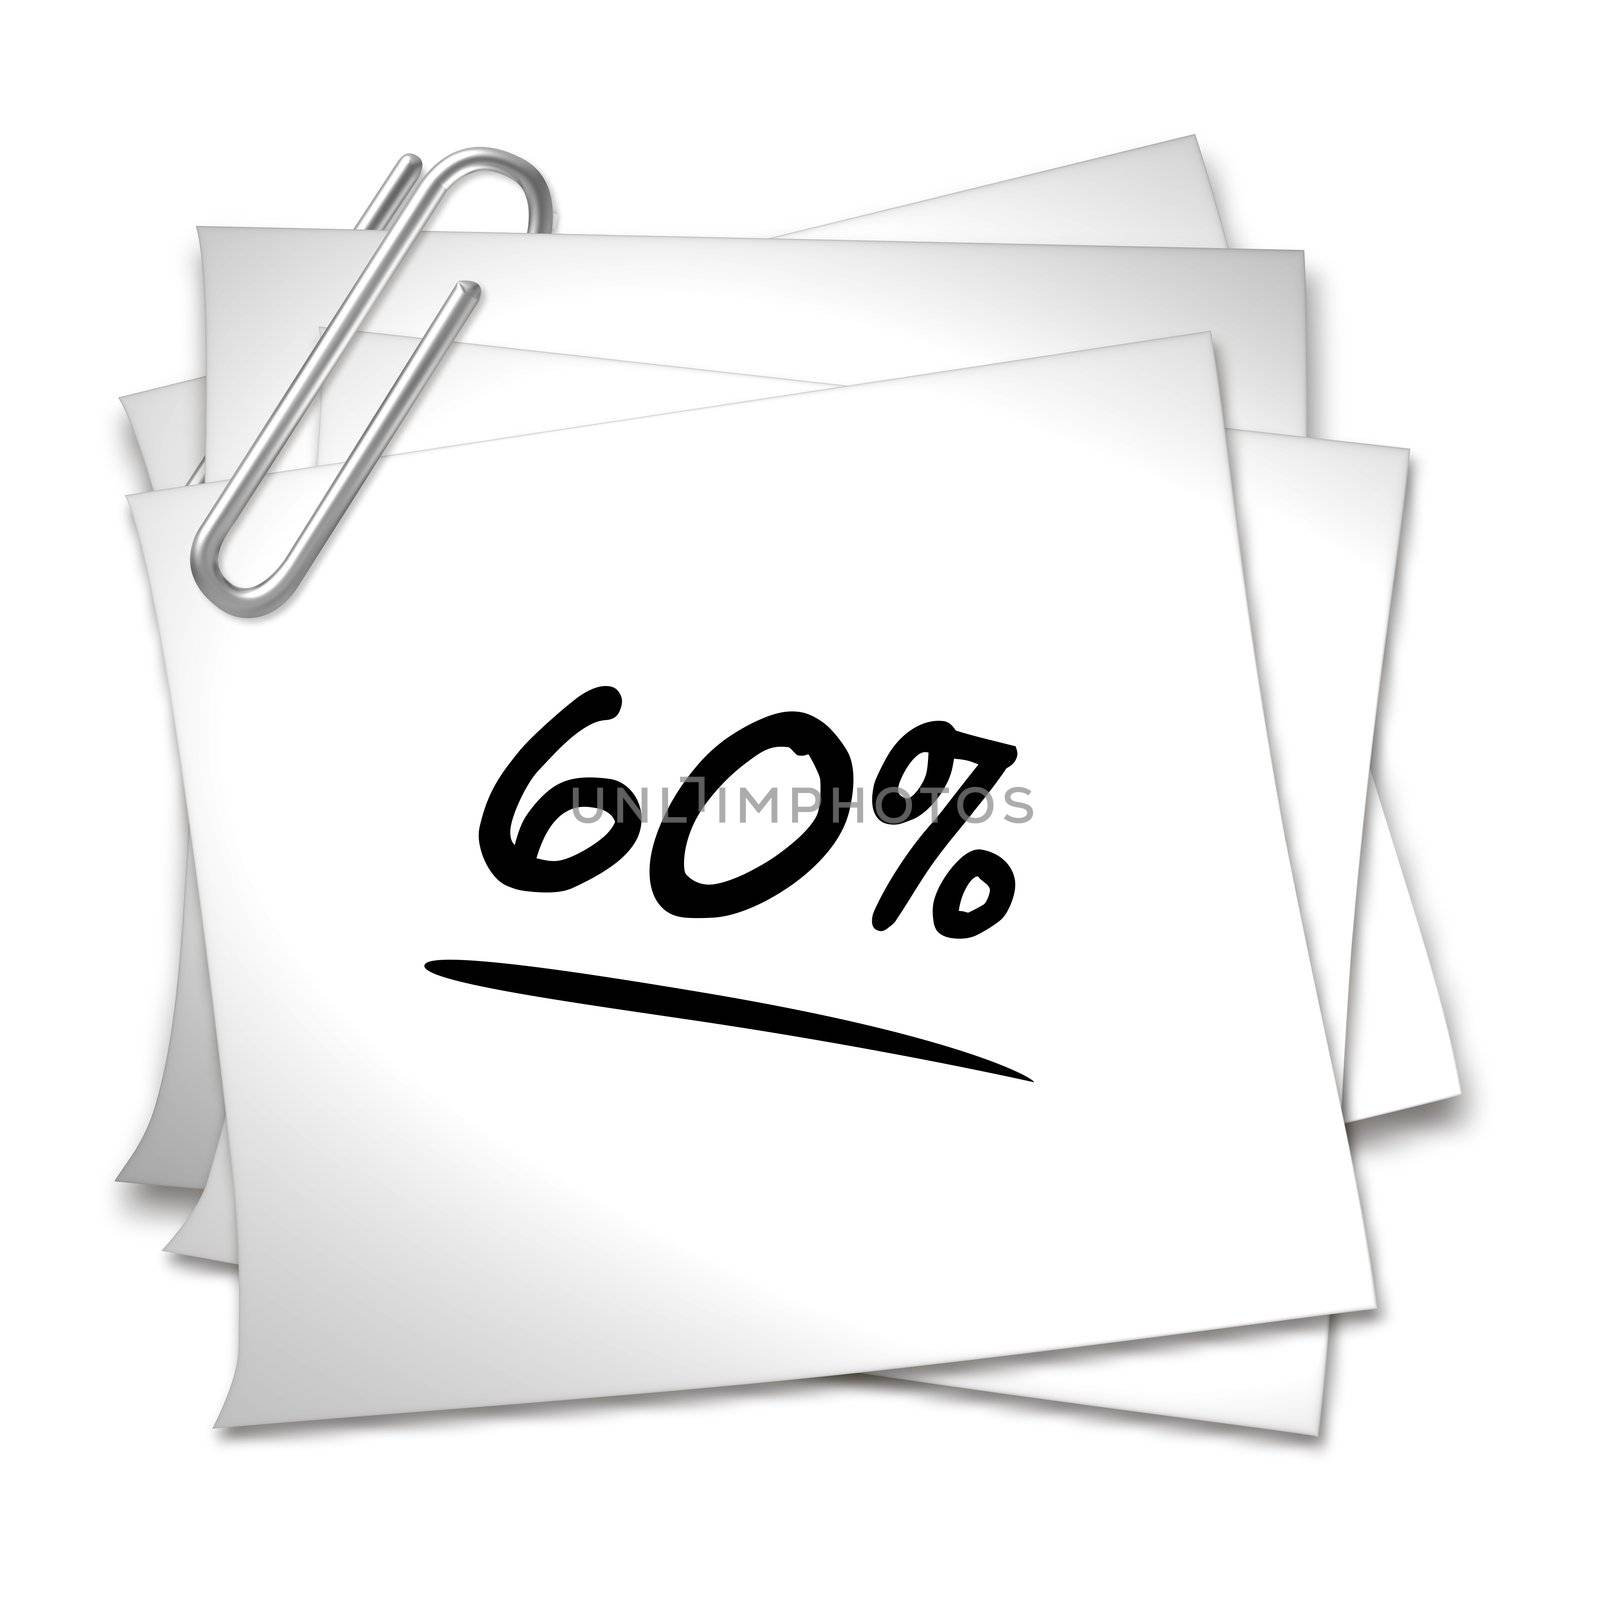 Memo with Paper Clip - 60 % by peromarketing